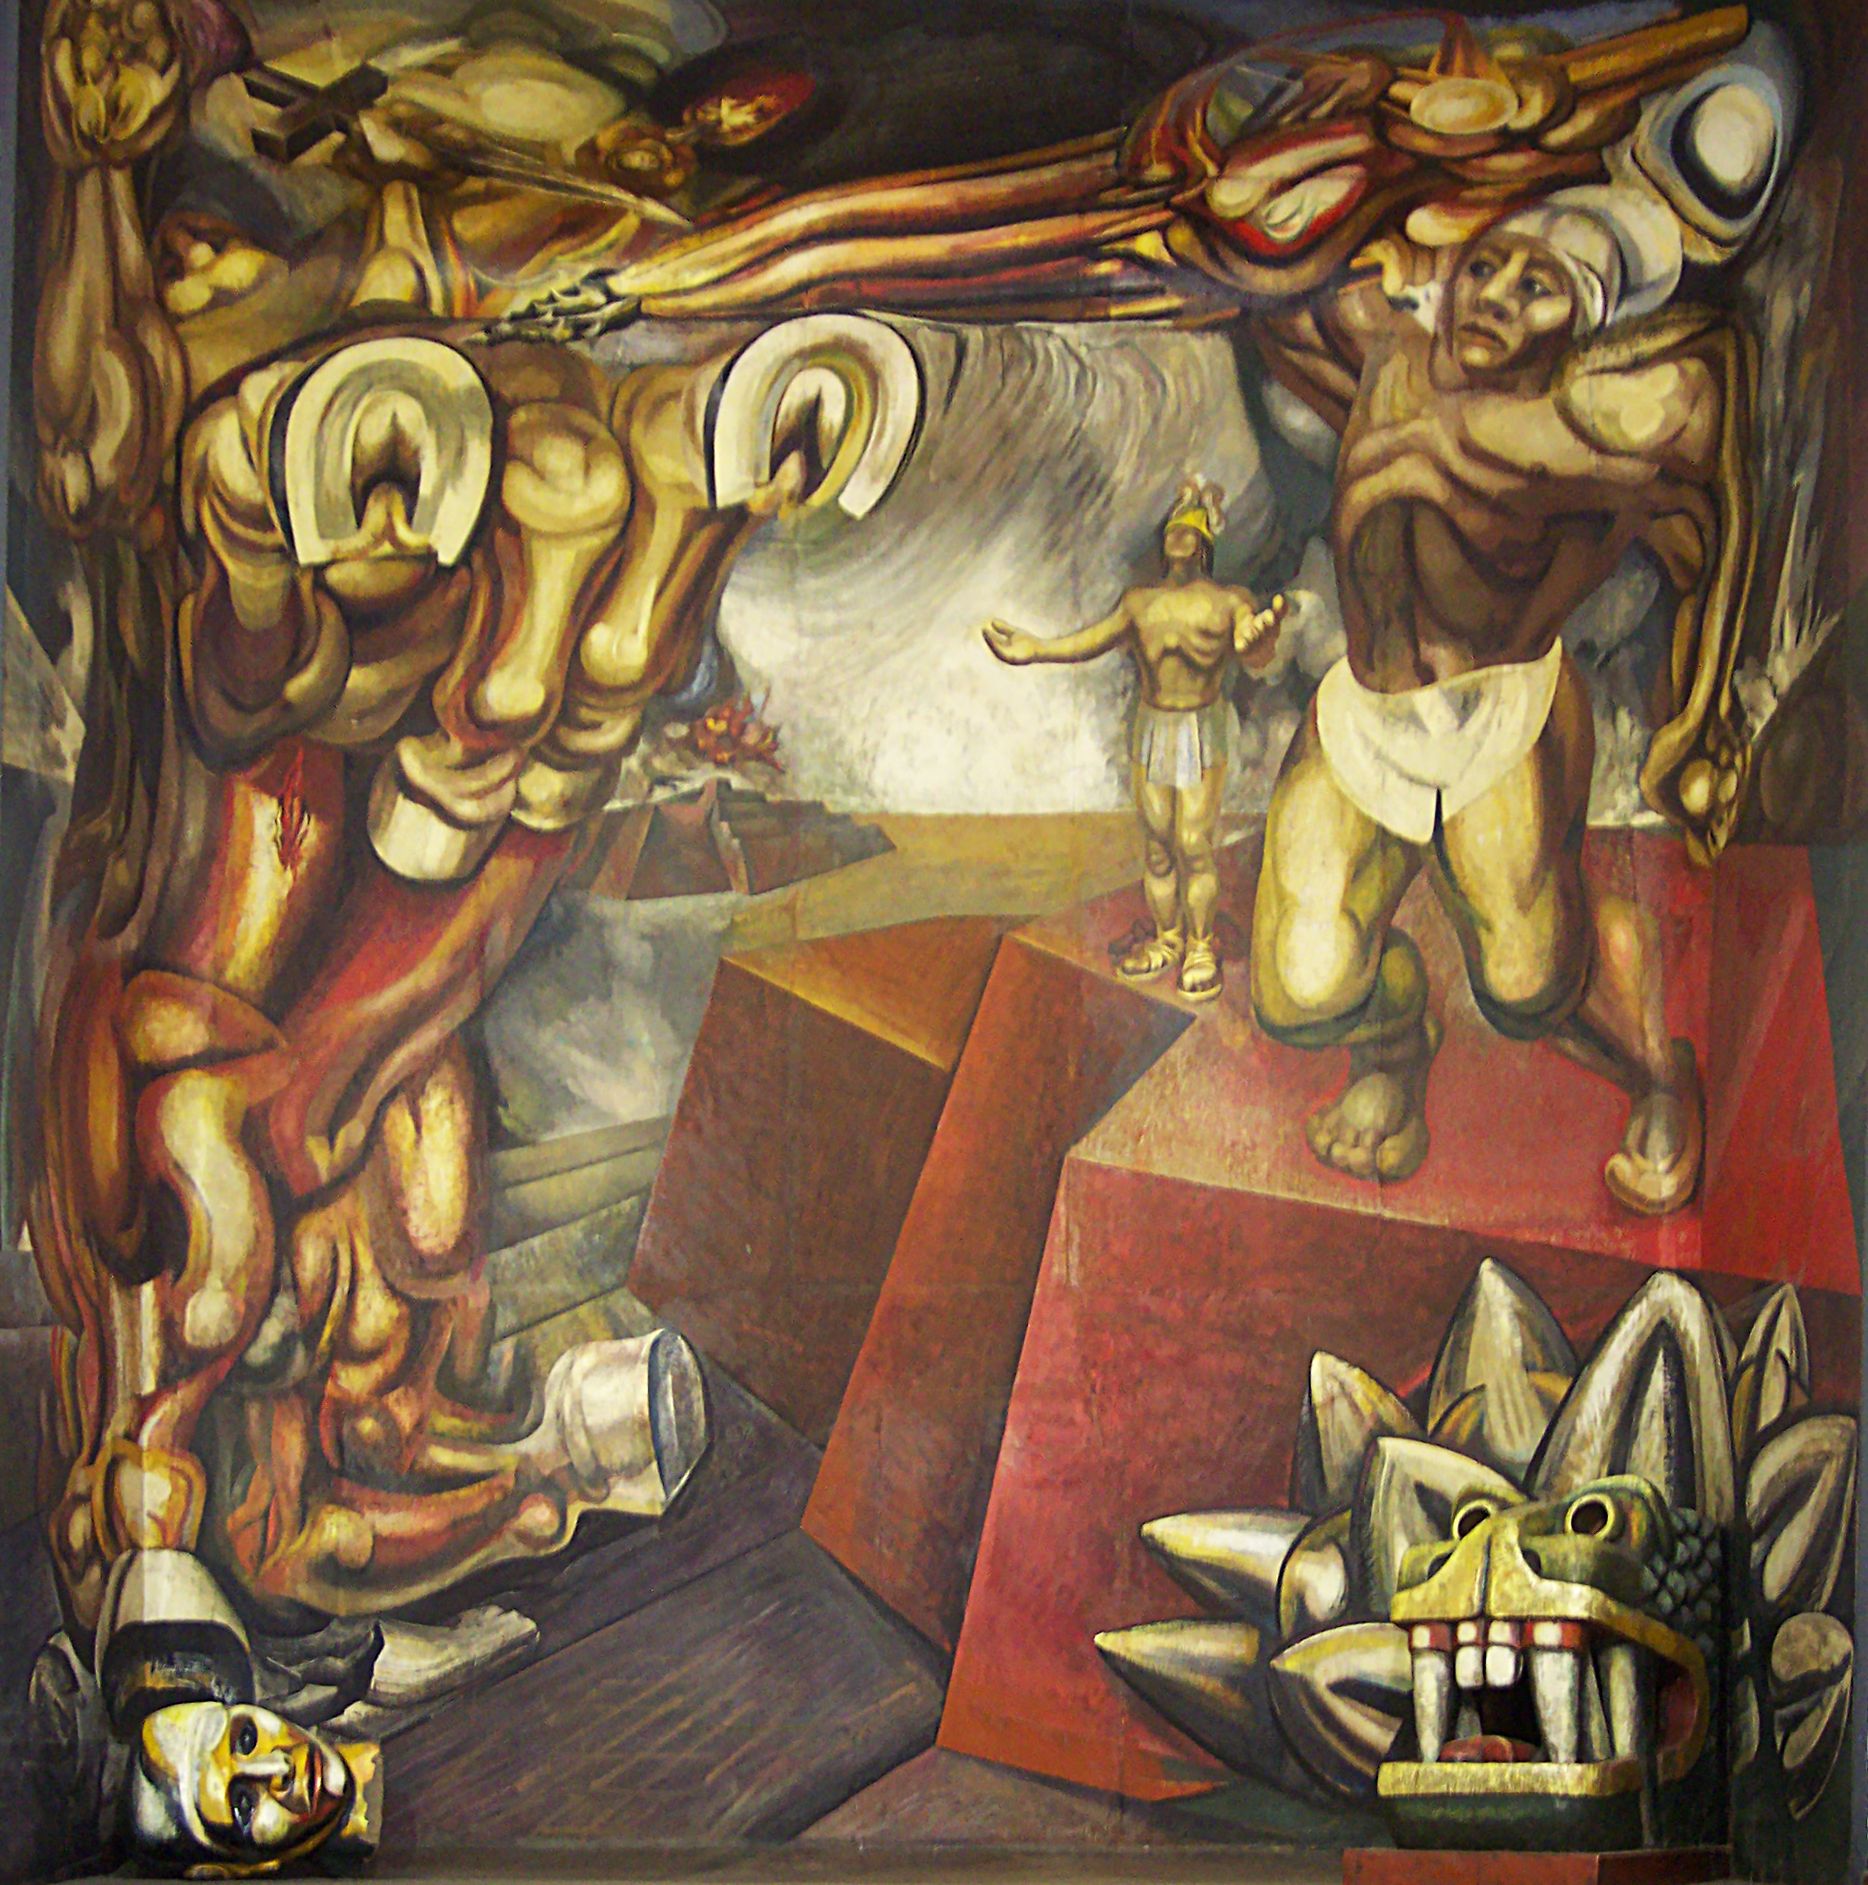 The mural pulses with warm, vivid colors and exaggerated shapes, exuding intense emotion. It captures a dramatic clash between mythological figures: on the right, the Aztec emperor Cuautemoc is seen striking the heart of a centaur, symbolizing imperialism and Christianity, on the left. In the backdrop, Moctezuma's gesture indicates surrender, suggesting the triumph of the revolutionaries.